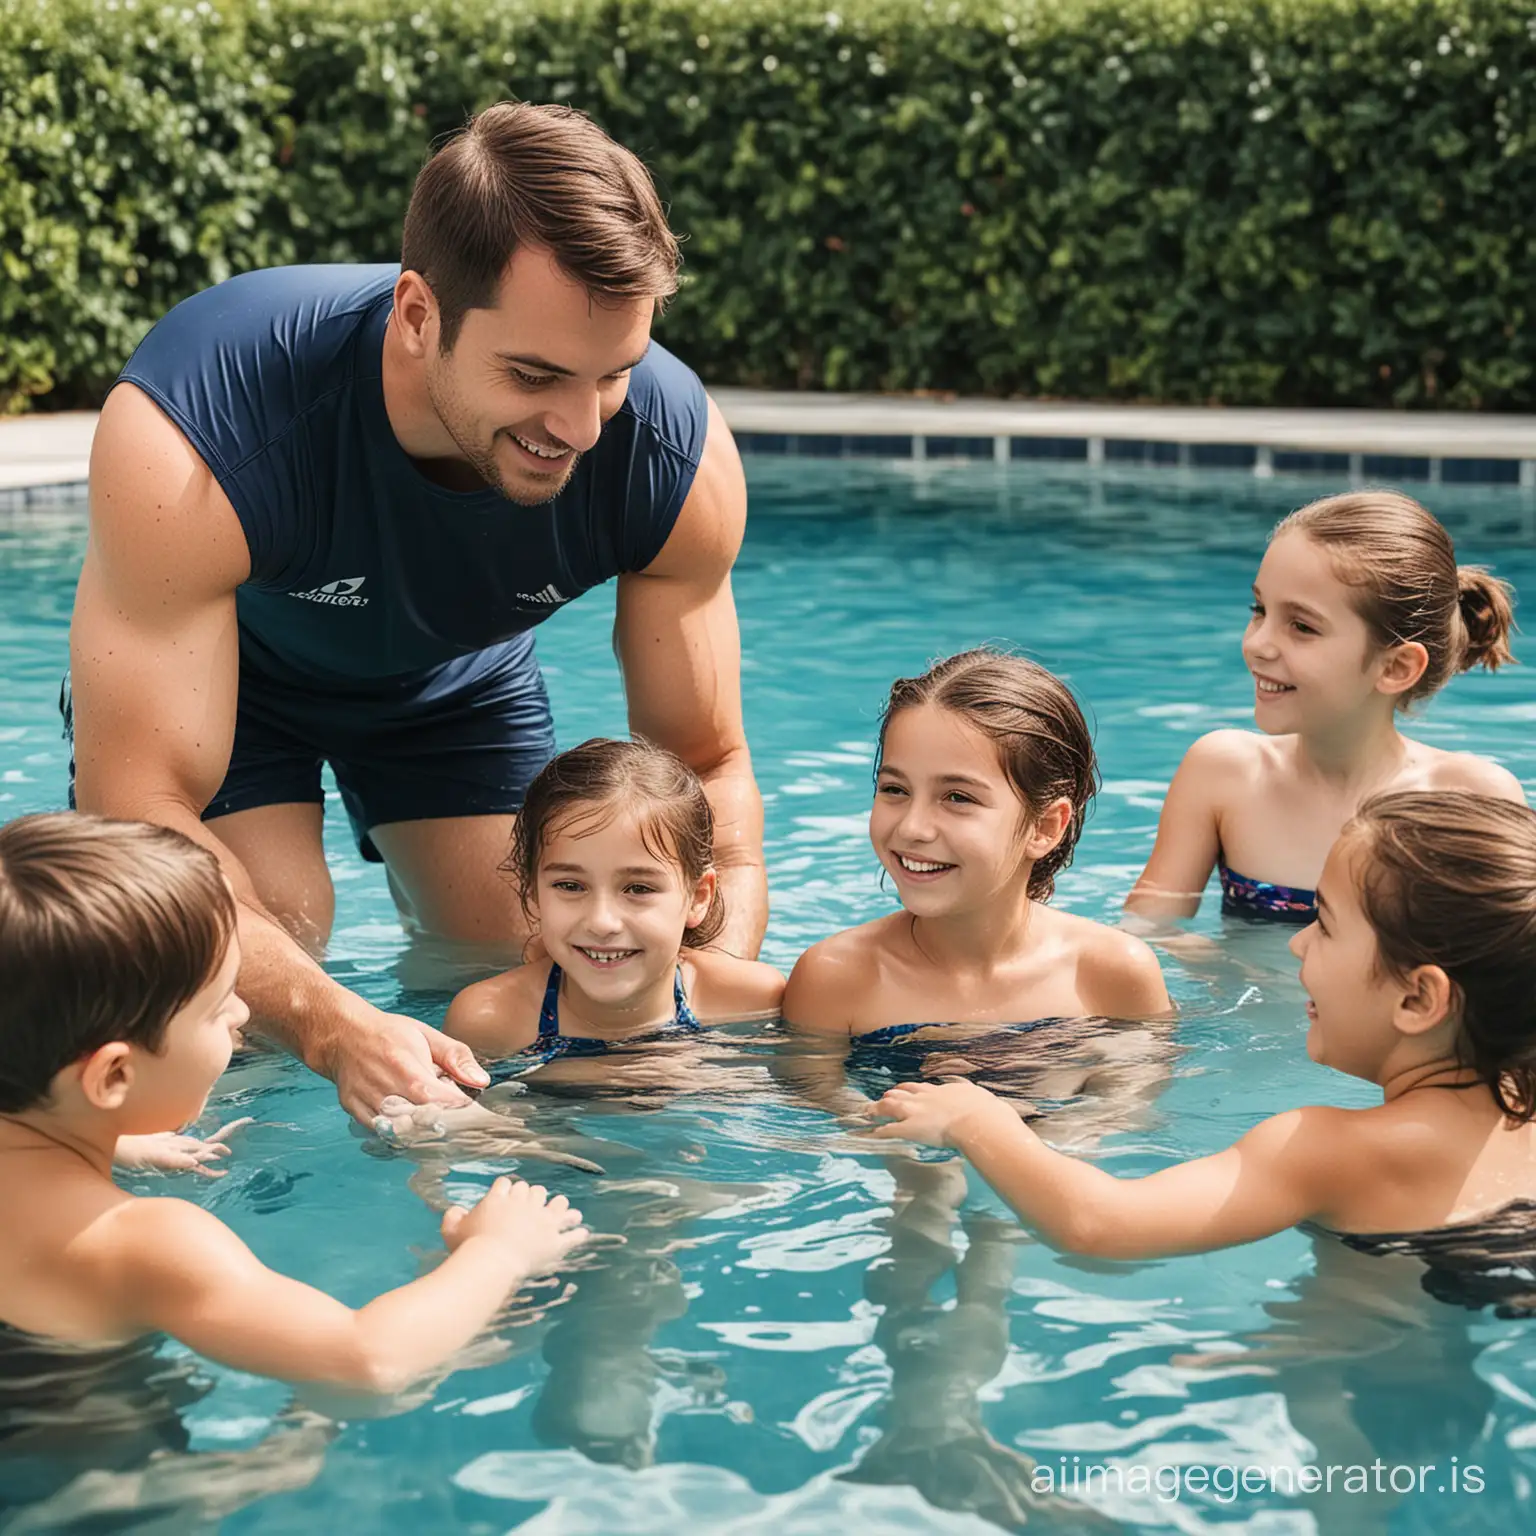 Kids-Learning-Swimming-Skills-with-Male-Trainer-in-Pool